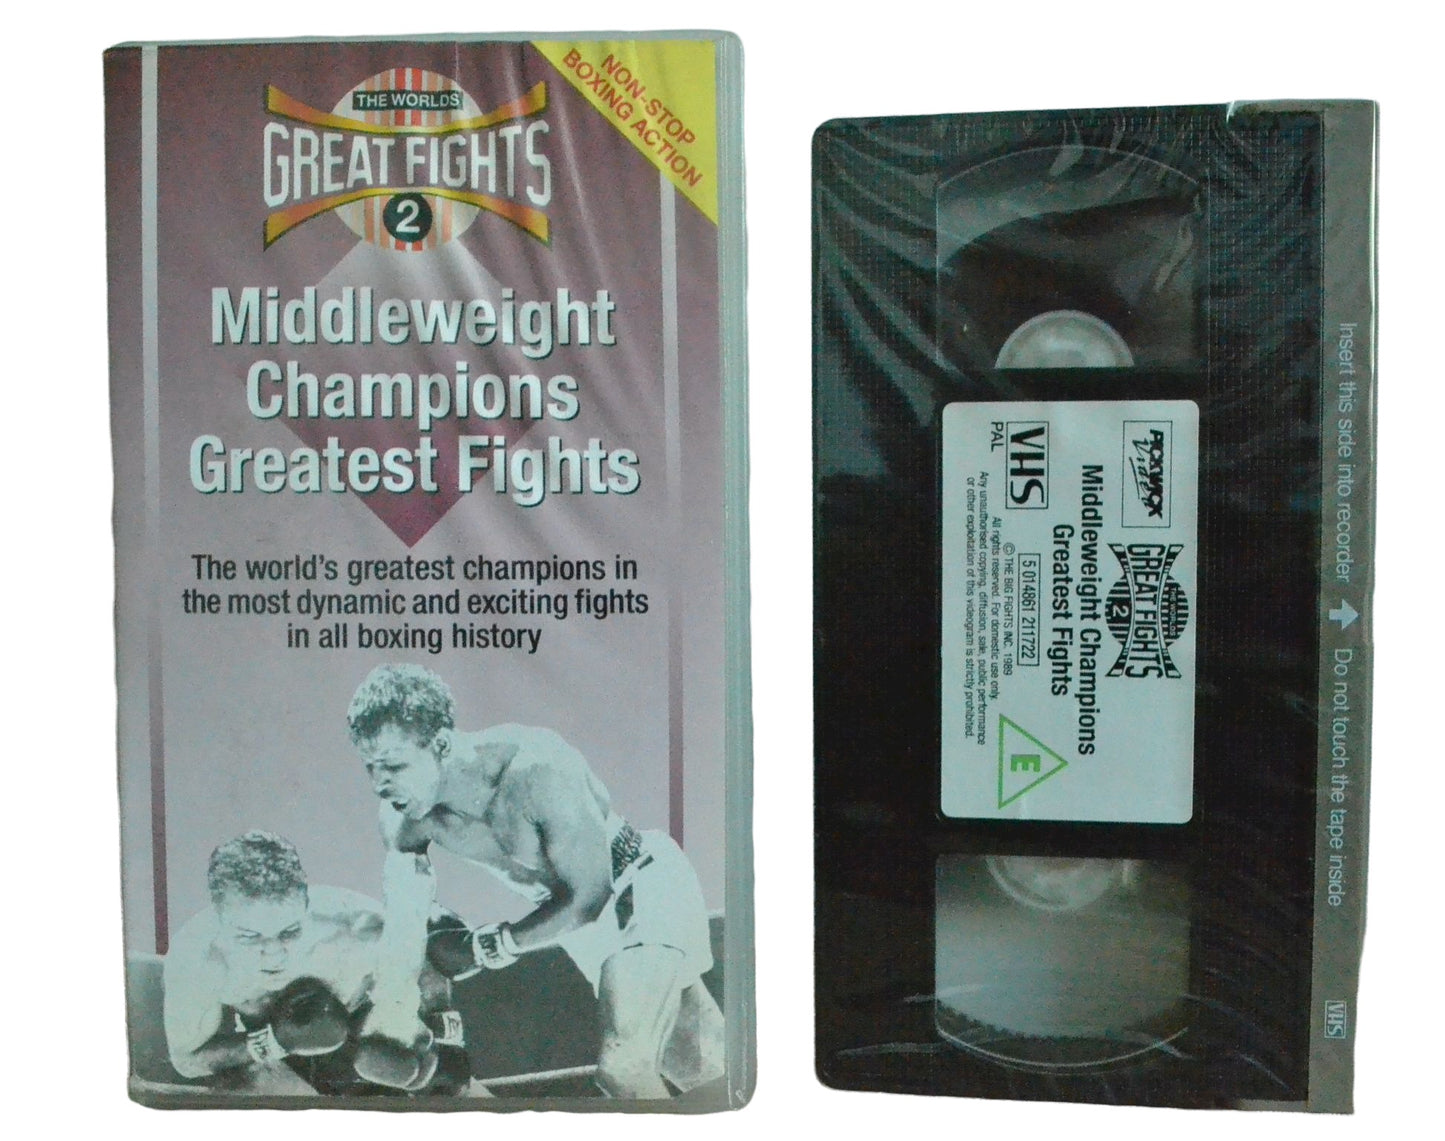 The Worlds Great Fights 2 - Middleweight Champions Greatest Fights - Stanley Ketchel - Pickwick Video - Boxing - Pal VHS-